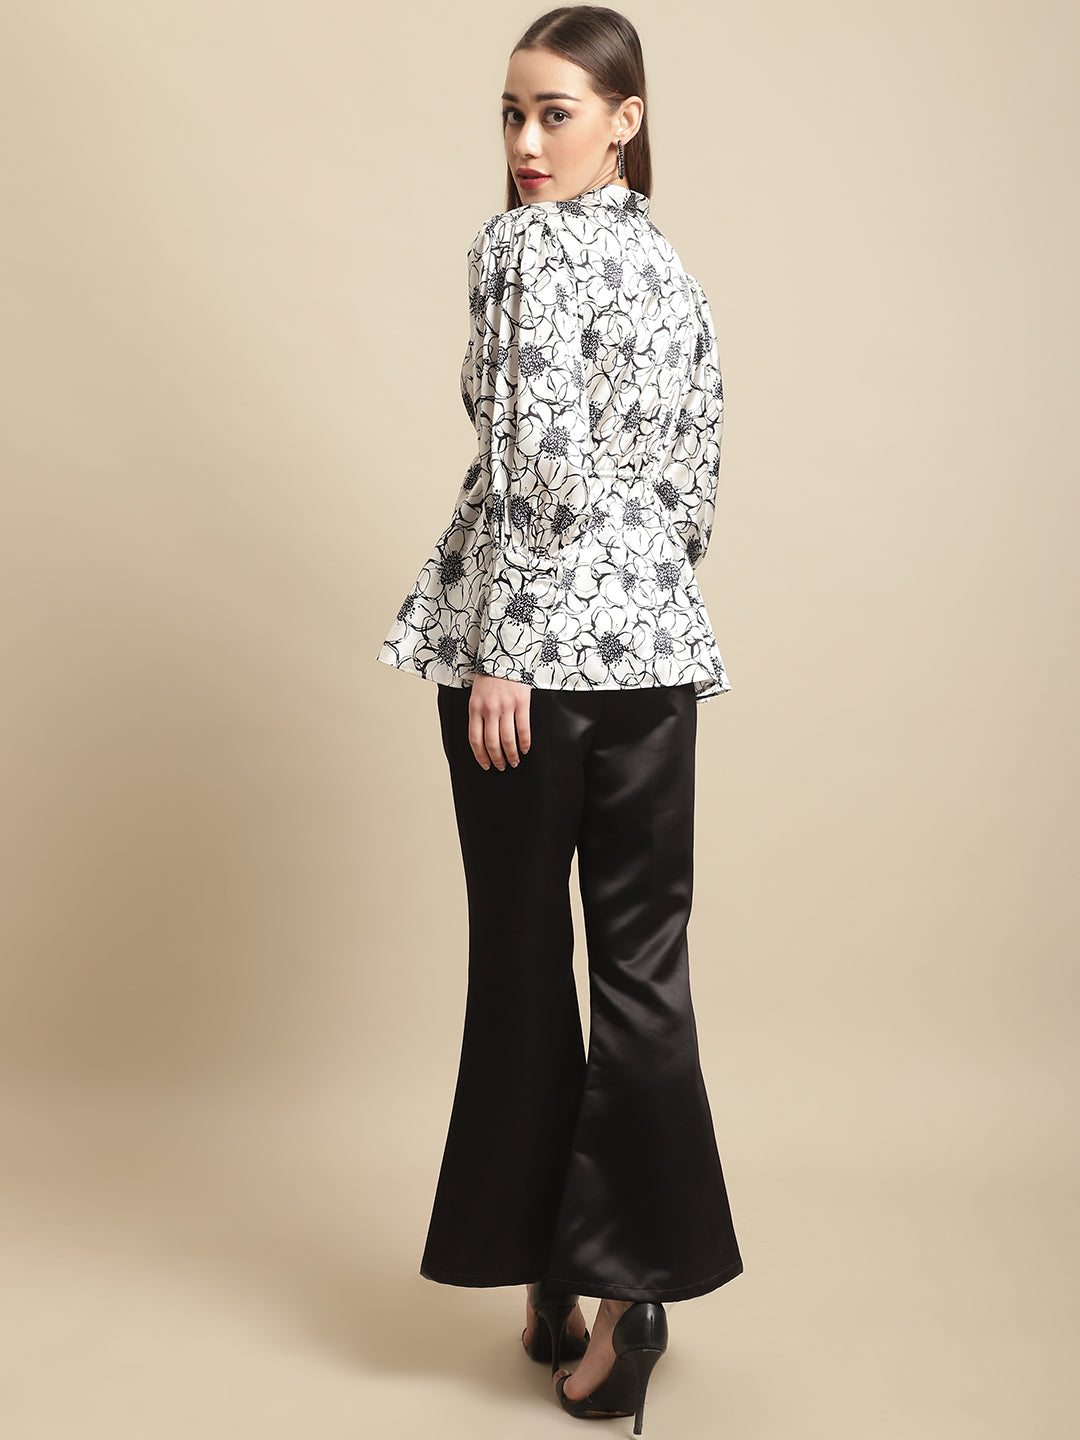 Bell Bottom Trouser With Flower Printed Top Co-Ord Set